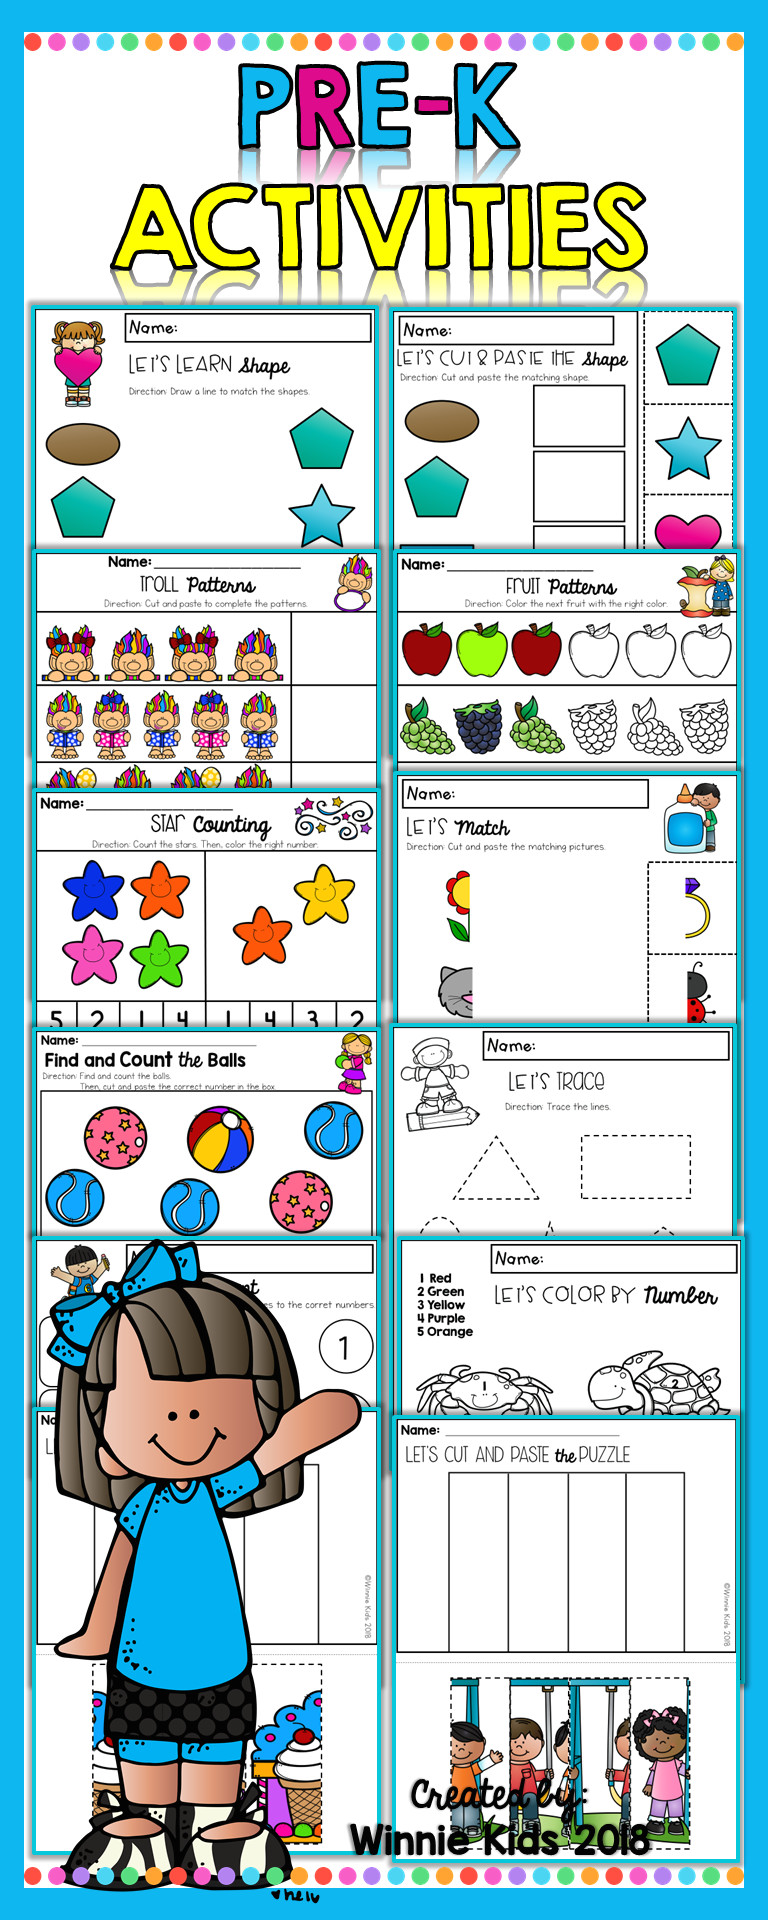 pre k activities is a very fun product for your prek and kindergarten students